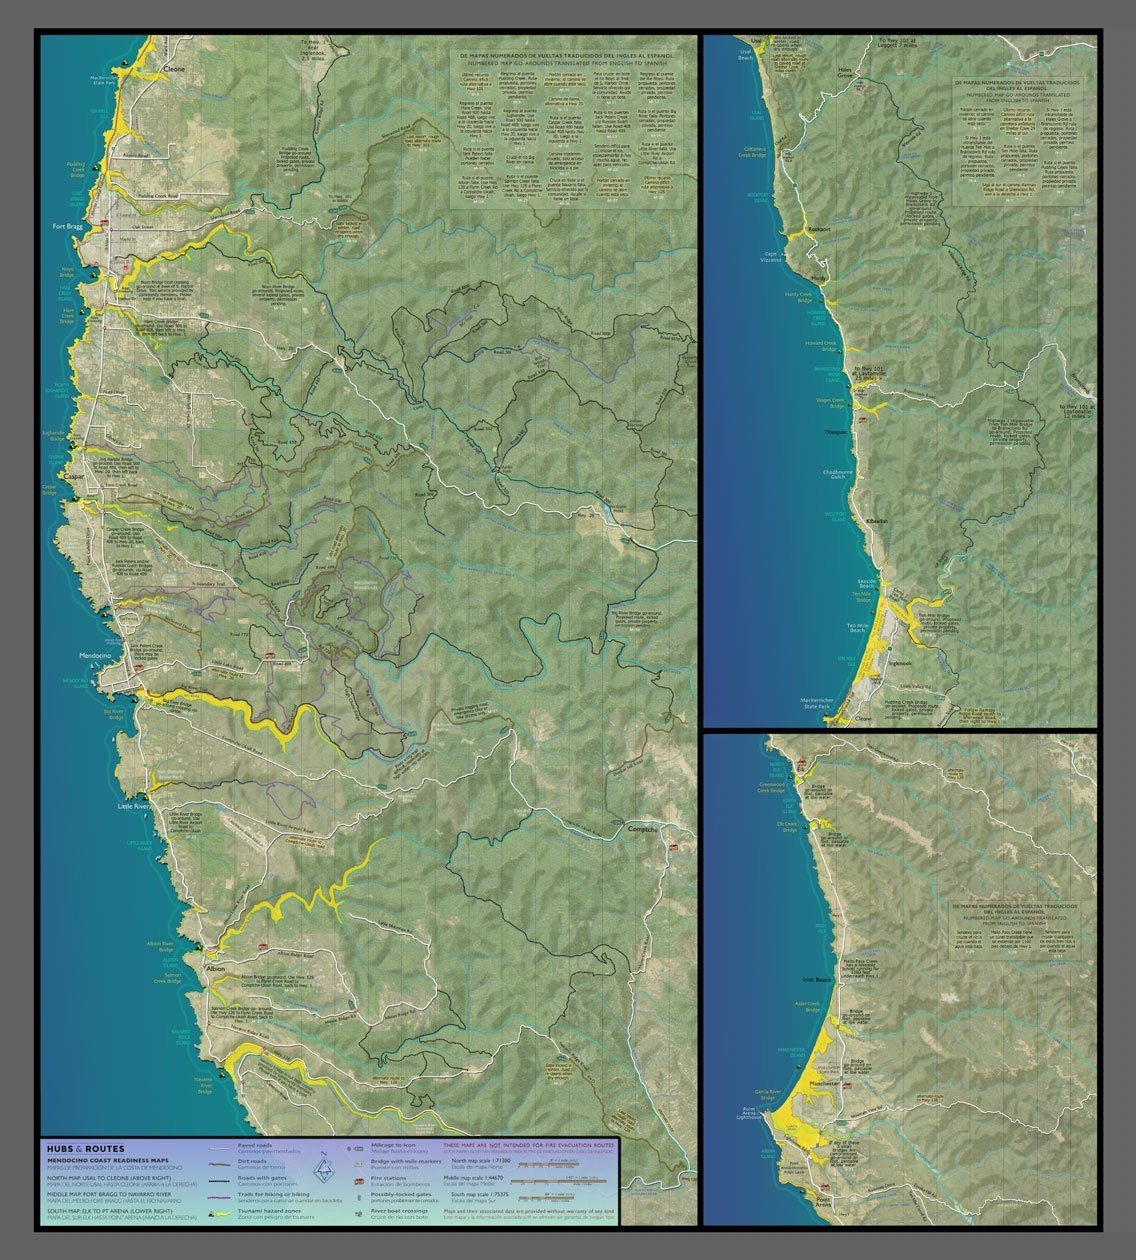 The front side of Mendocino Coast Readiness Map